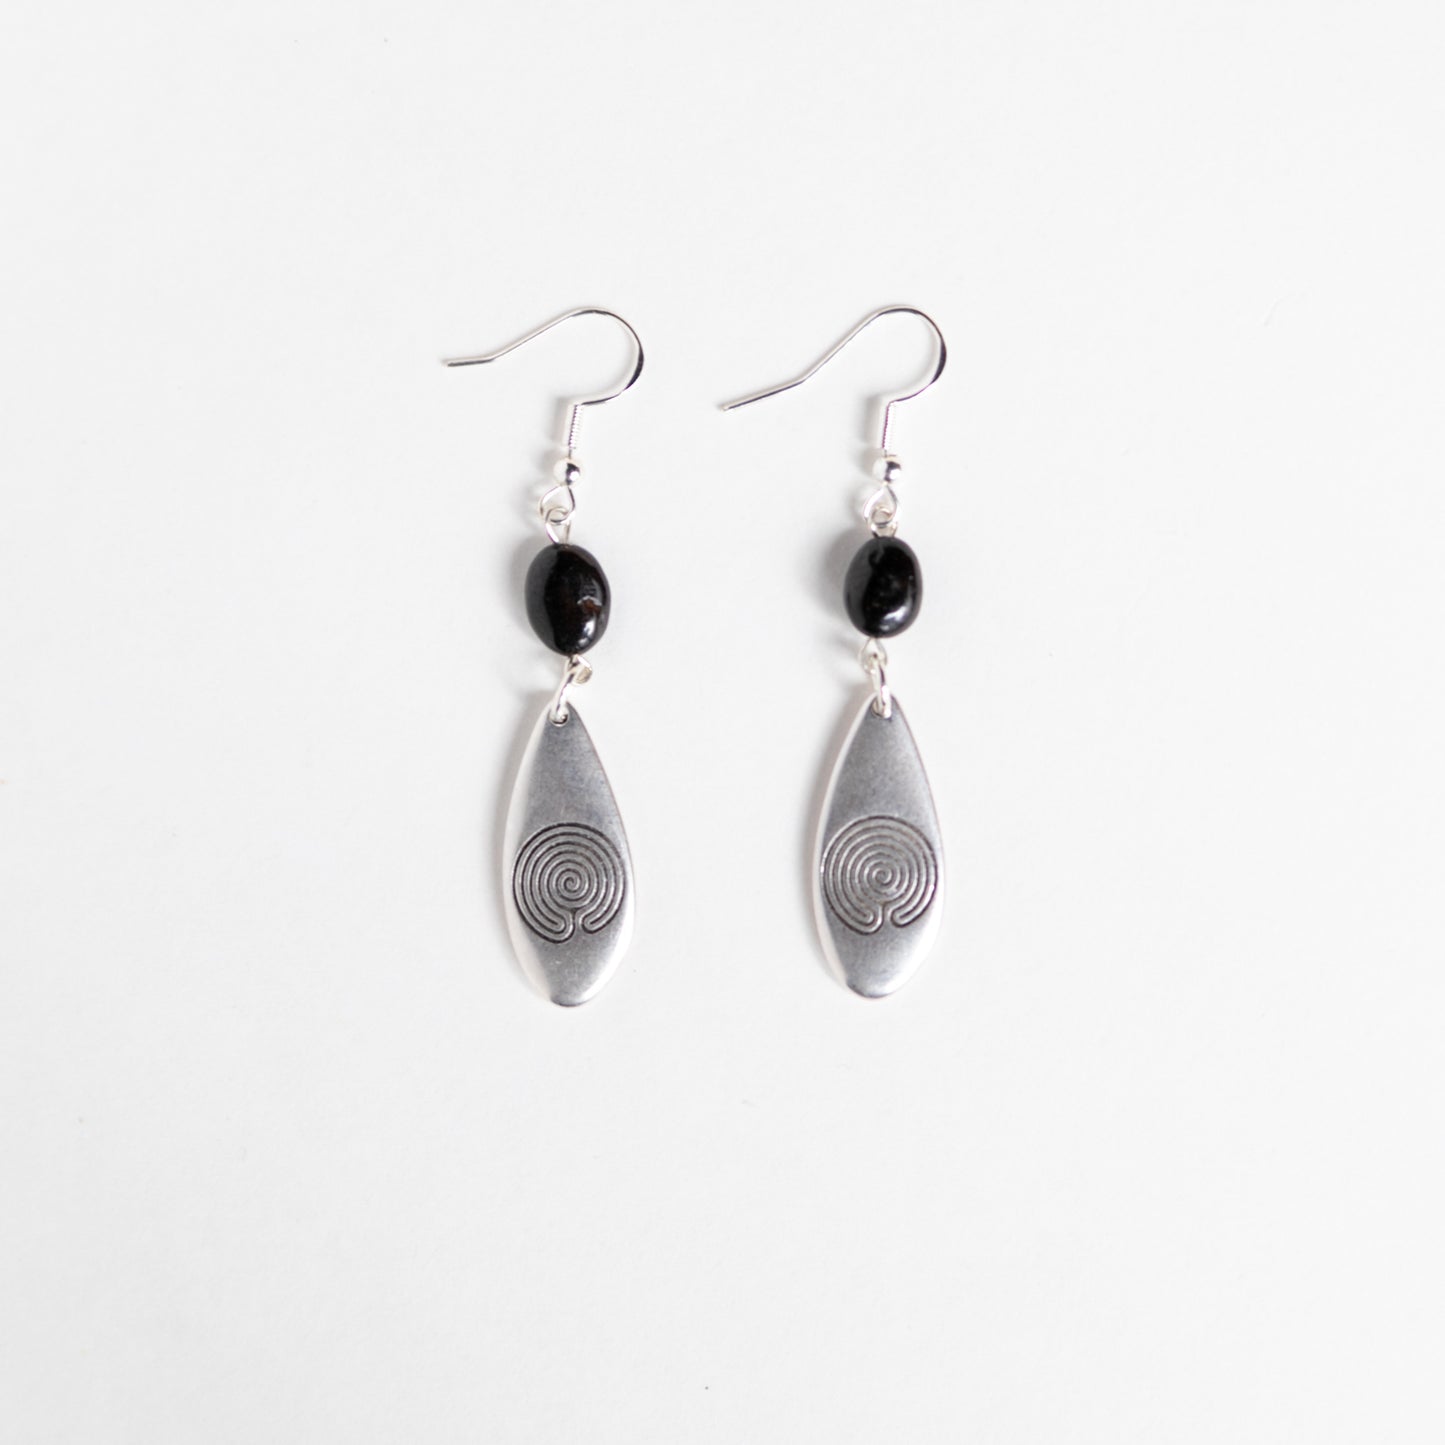 Silver Labyrinth Earrings with Garnet Stones